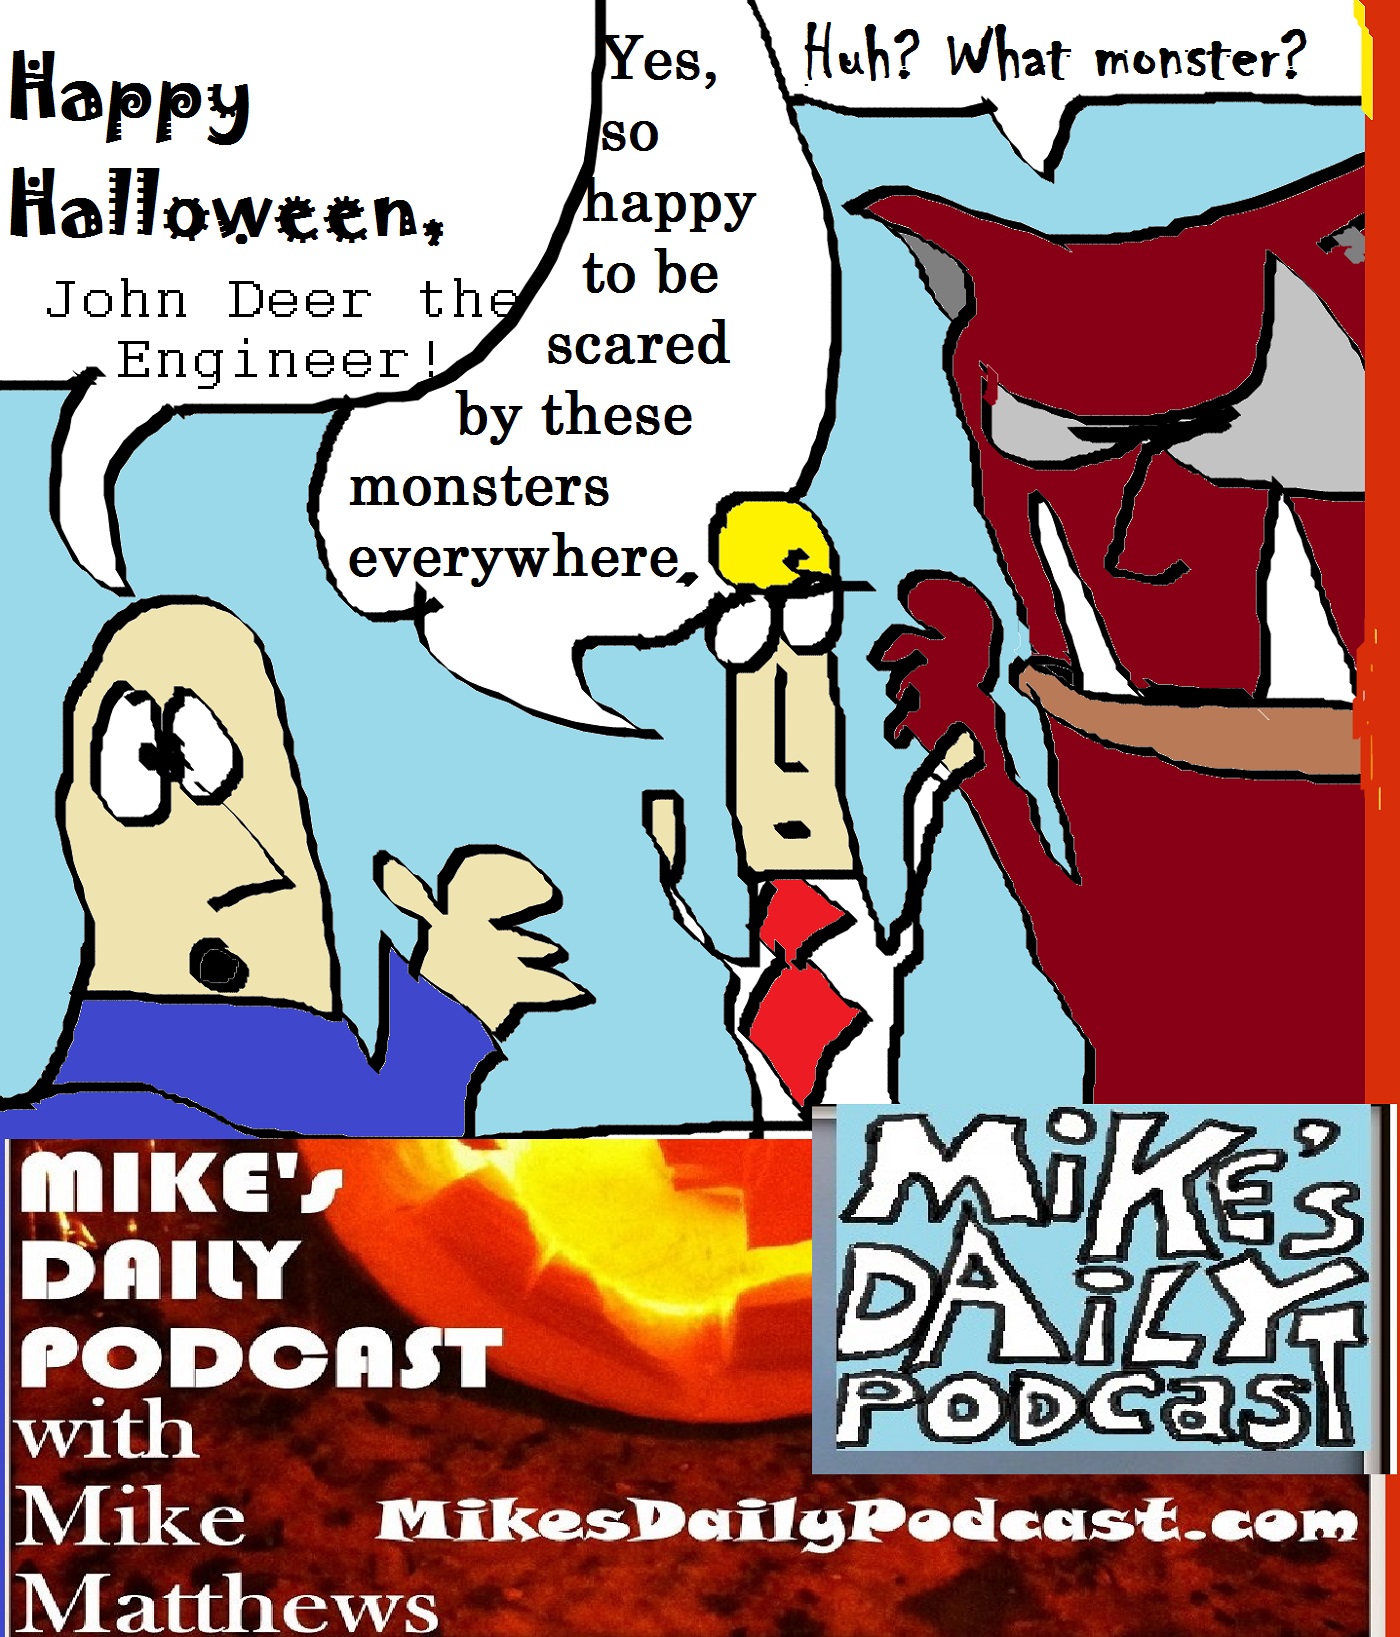 mikes-daily-podcast-1208-john-deer-the-engineer-halloween